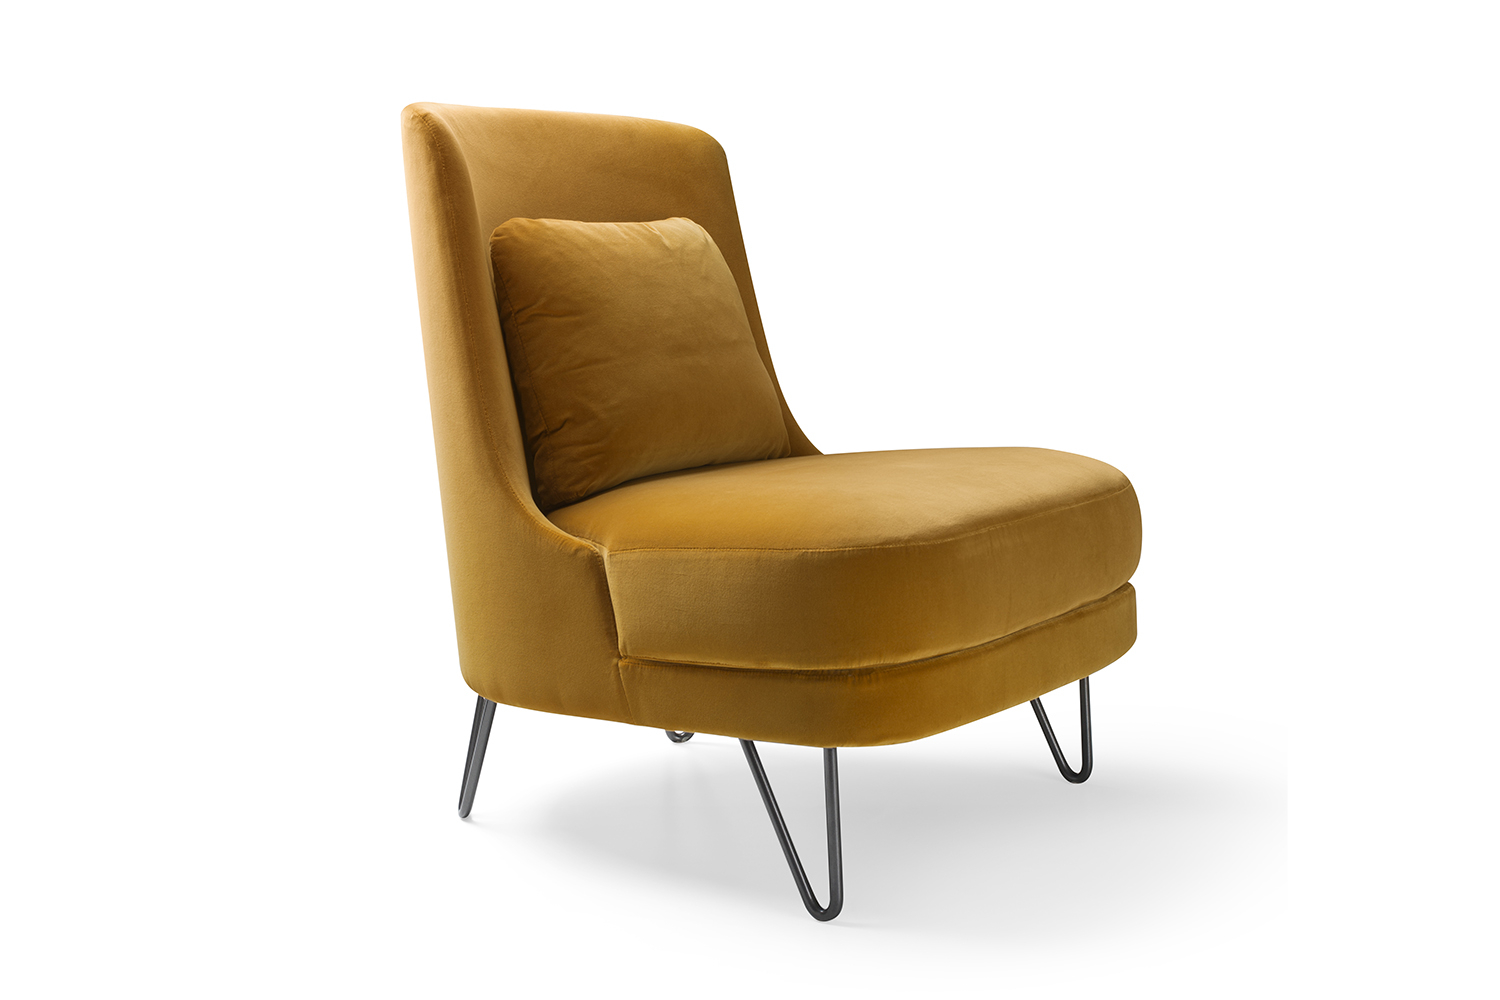 Retro style armchair with hairpin legs Chris